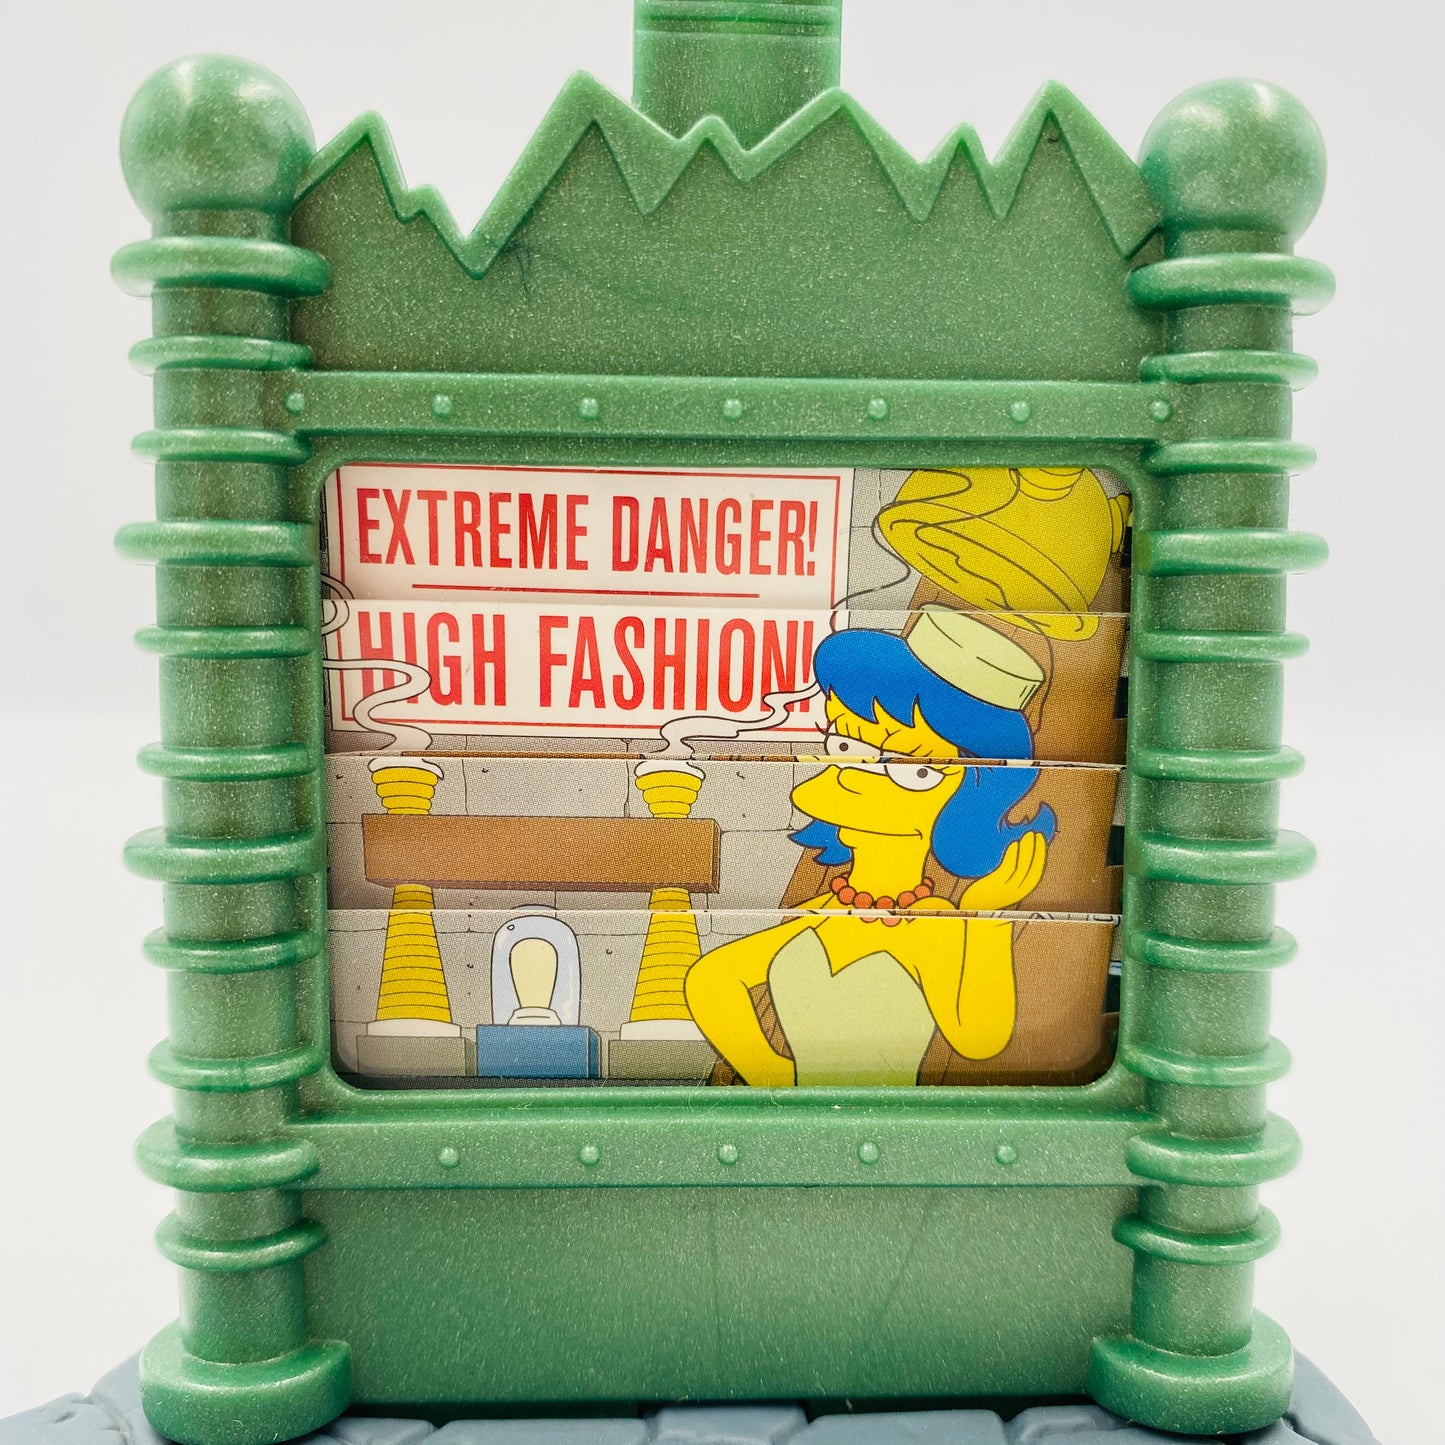 The Simpsons Creepy Classics Marge Burger King Kids' Meals toy (2002) loose